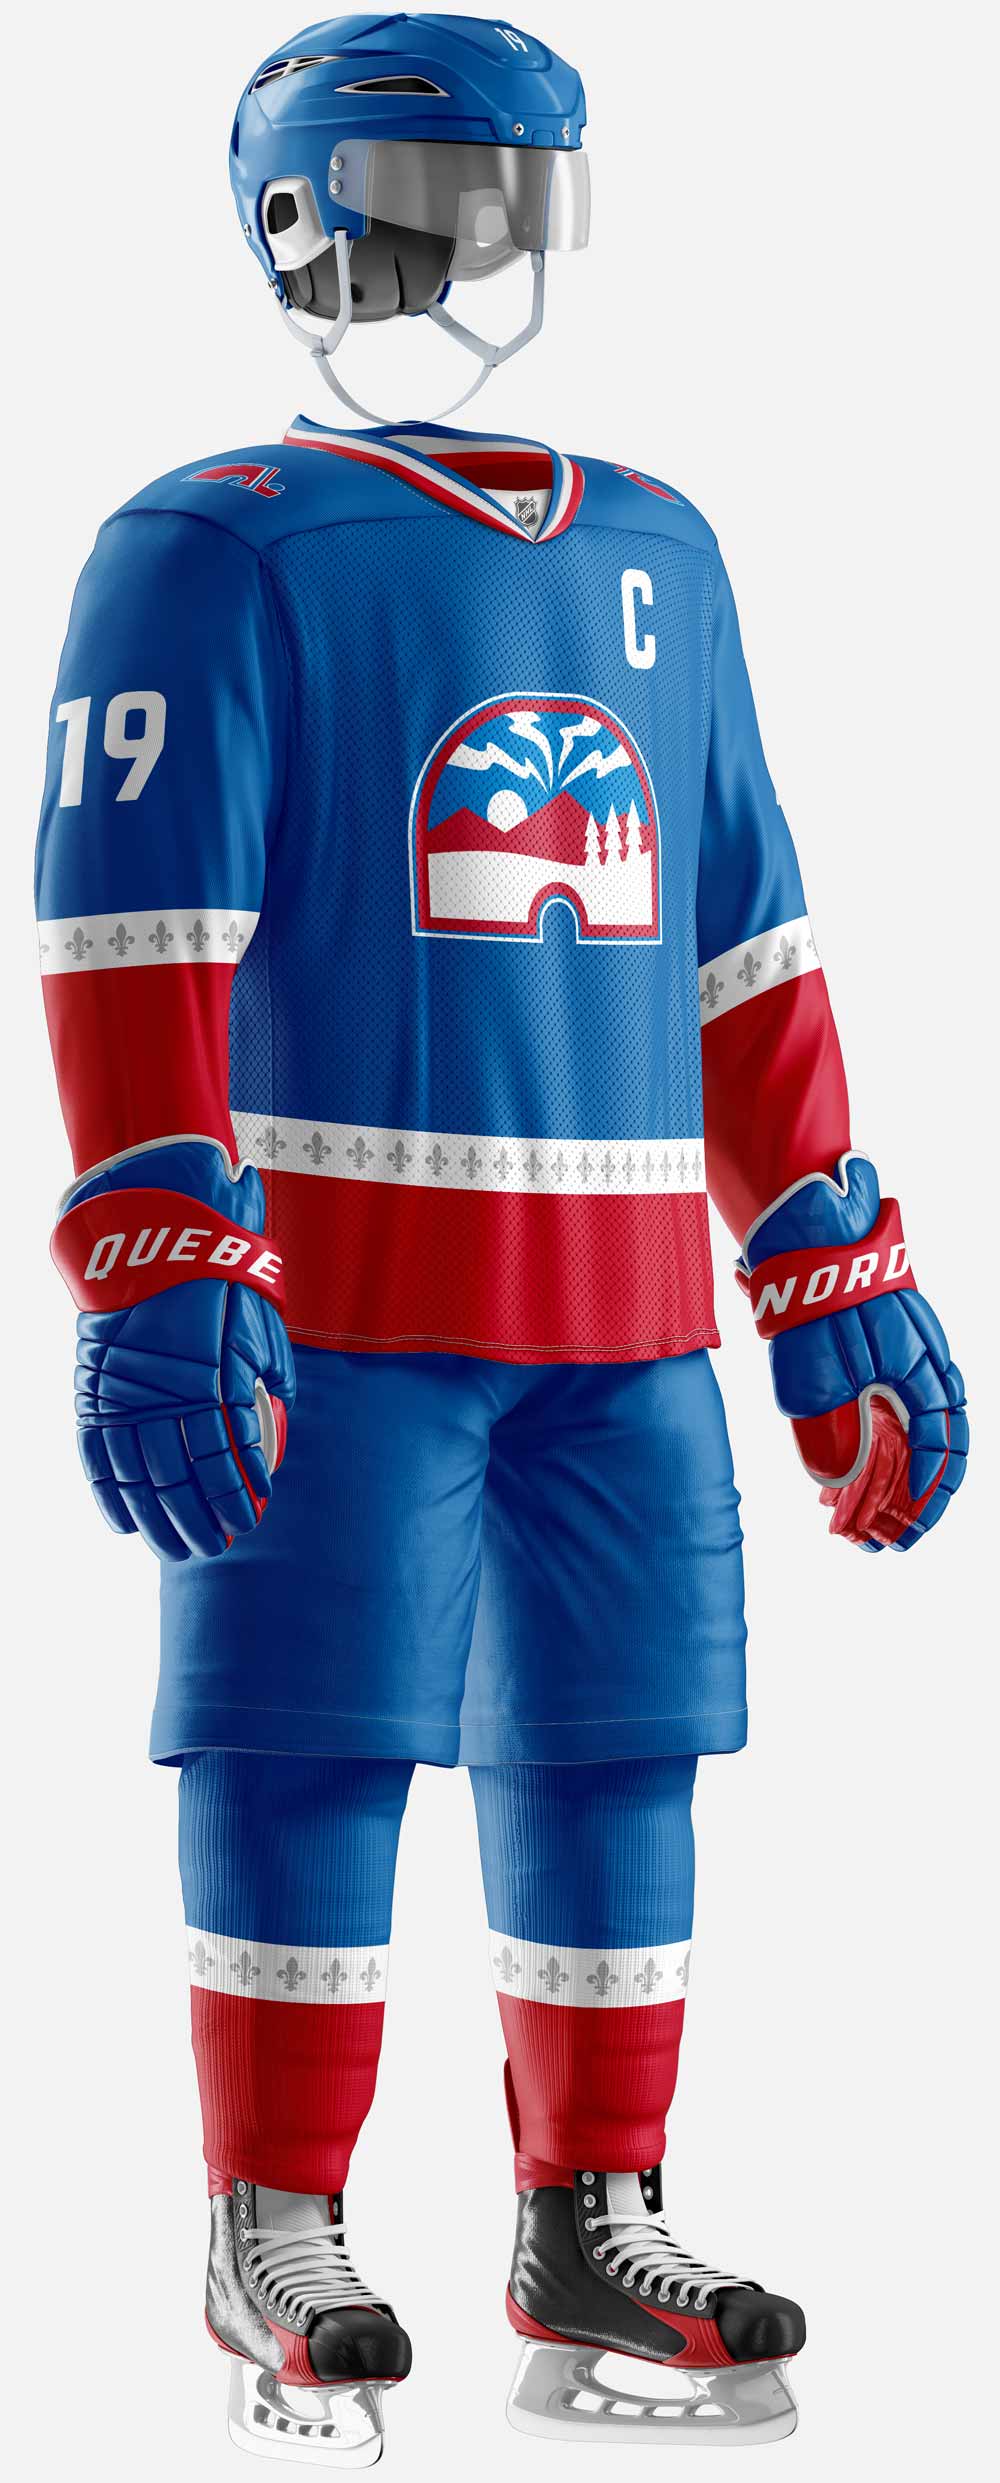 A mock up of the new Québec Nordiques jersey design.